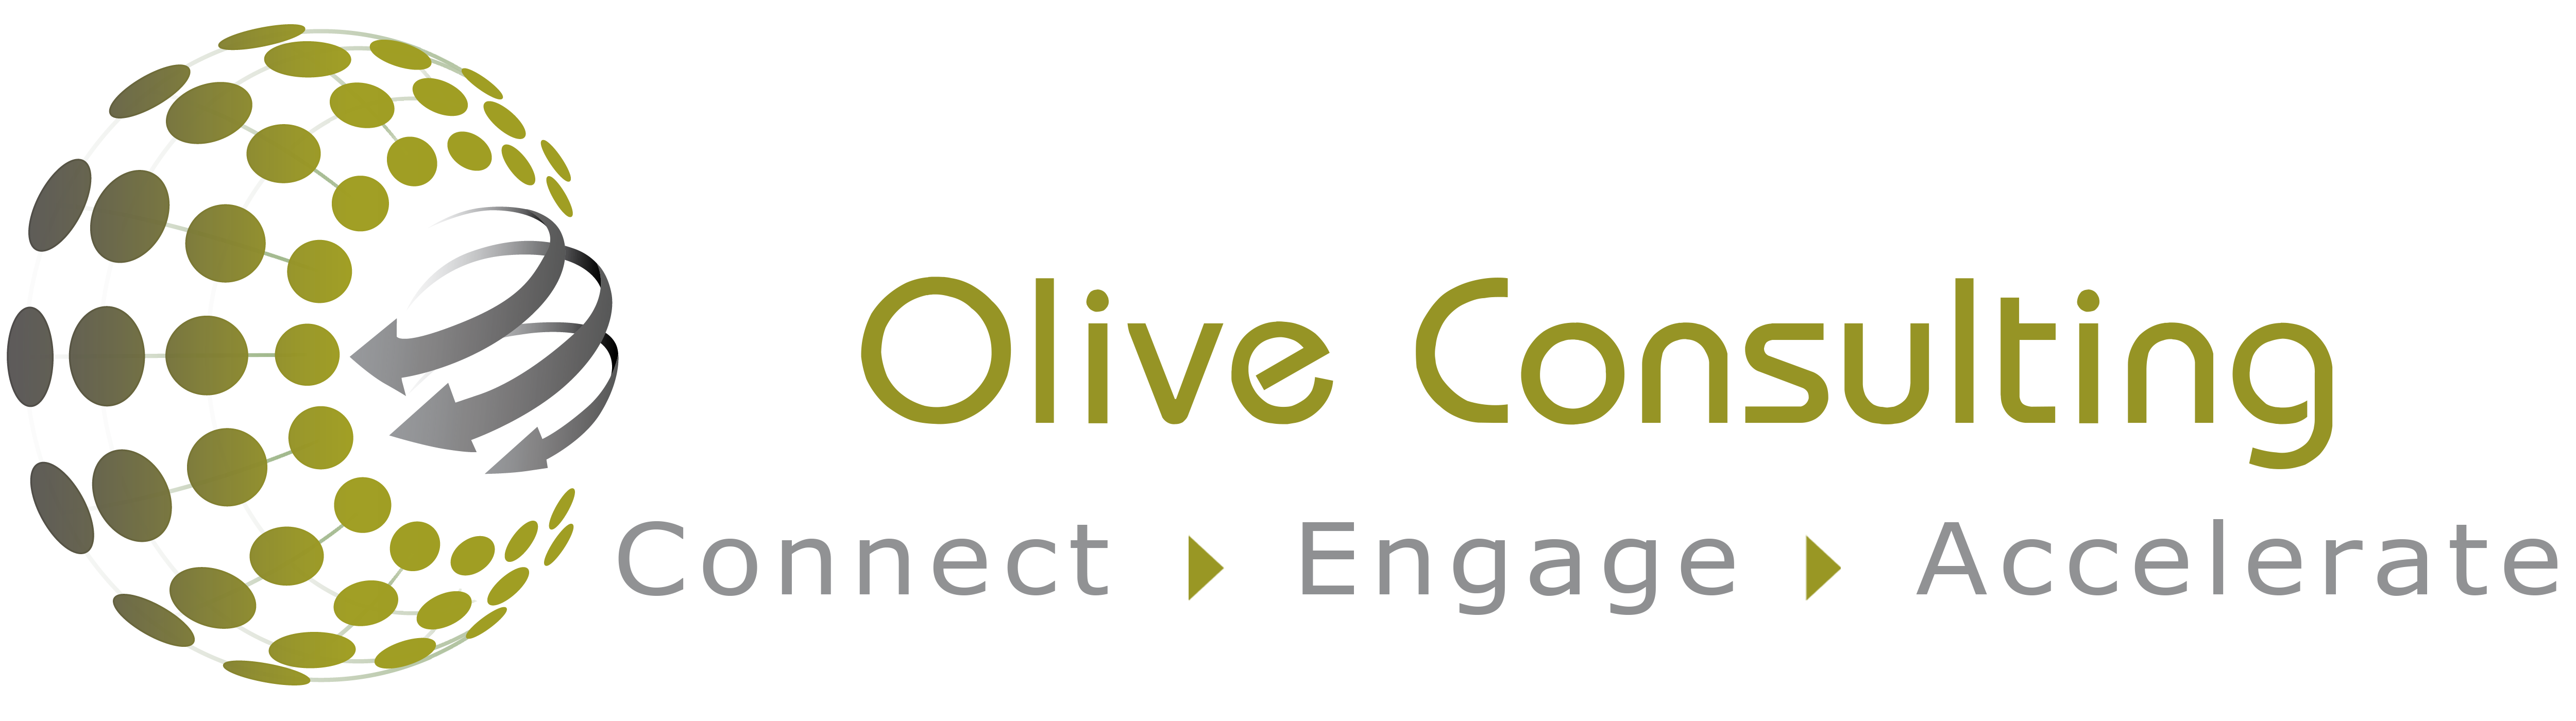 Olive Consulting